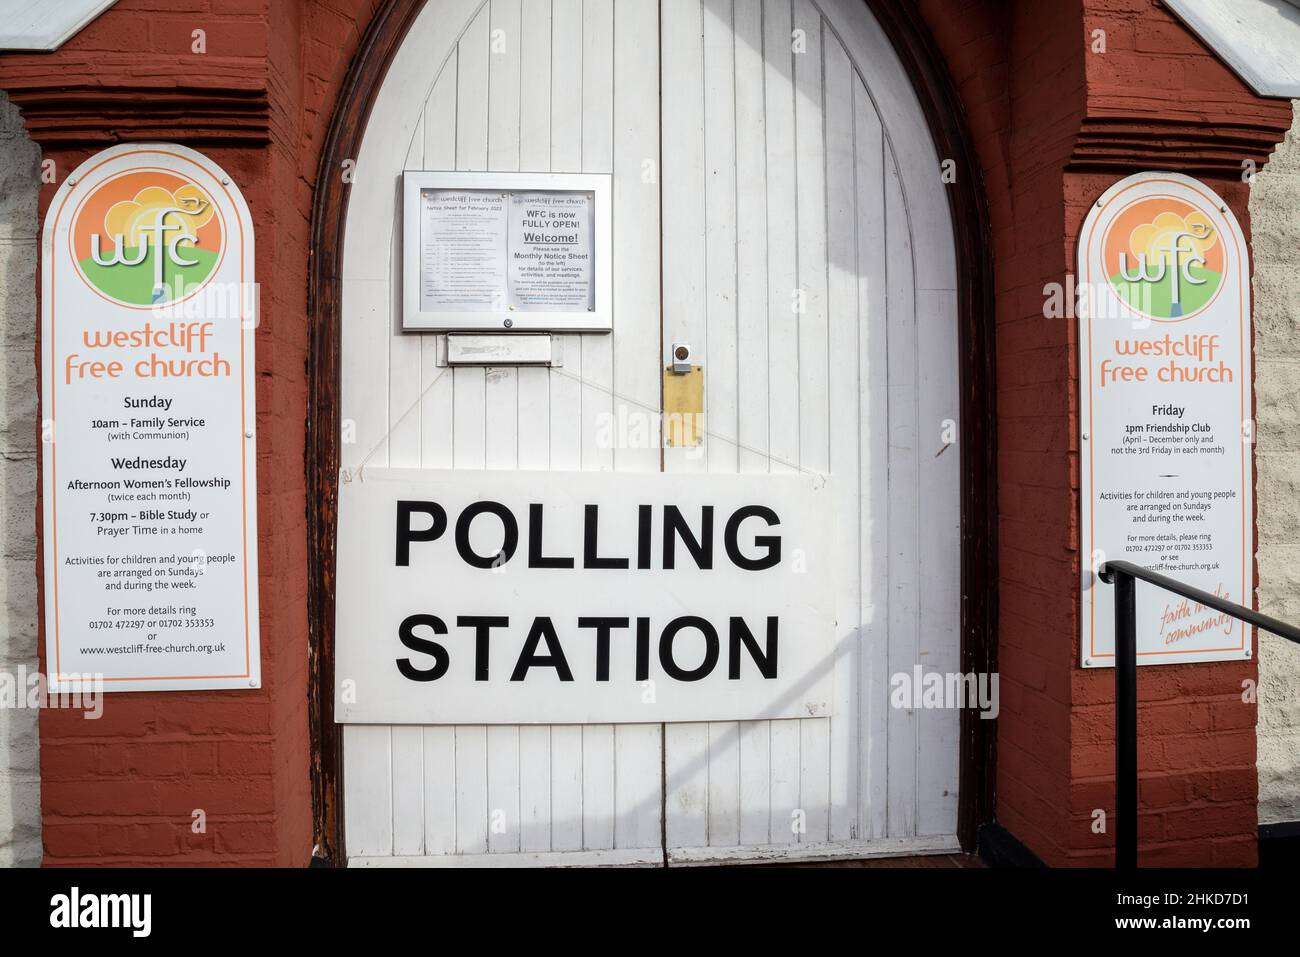 Polling station for the Southend West by-election to replace murdered MP Sir David Amess. Westcliff Free Church Stock Photo